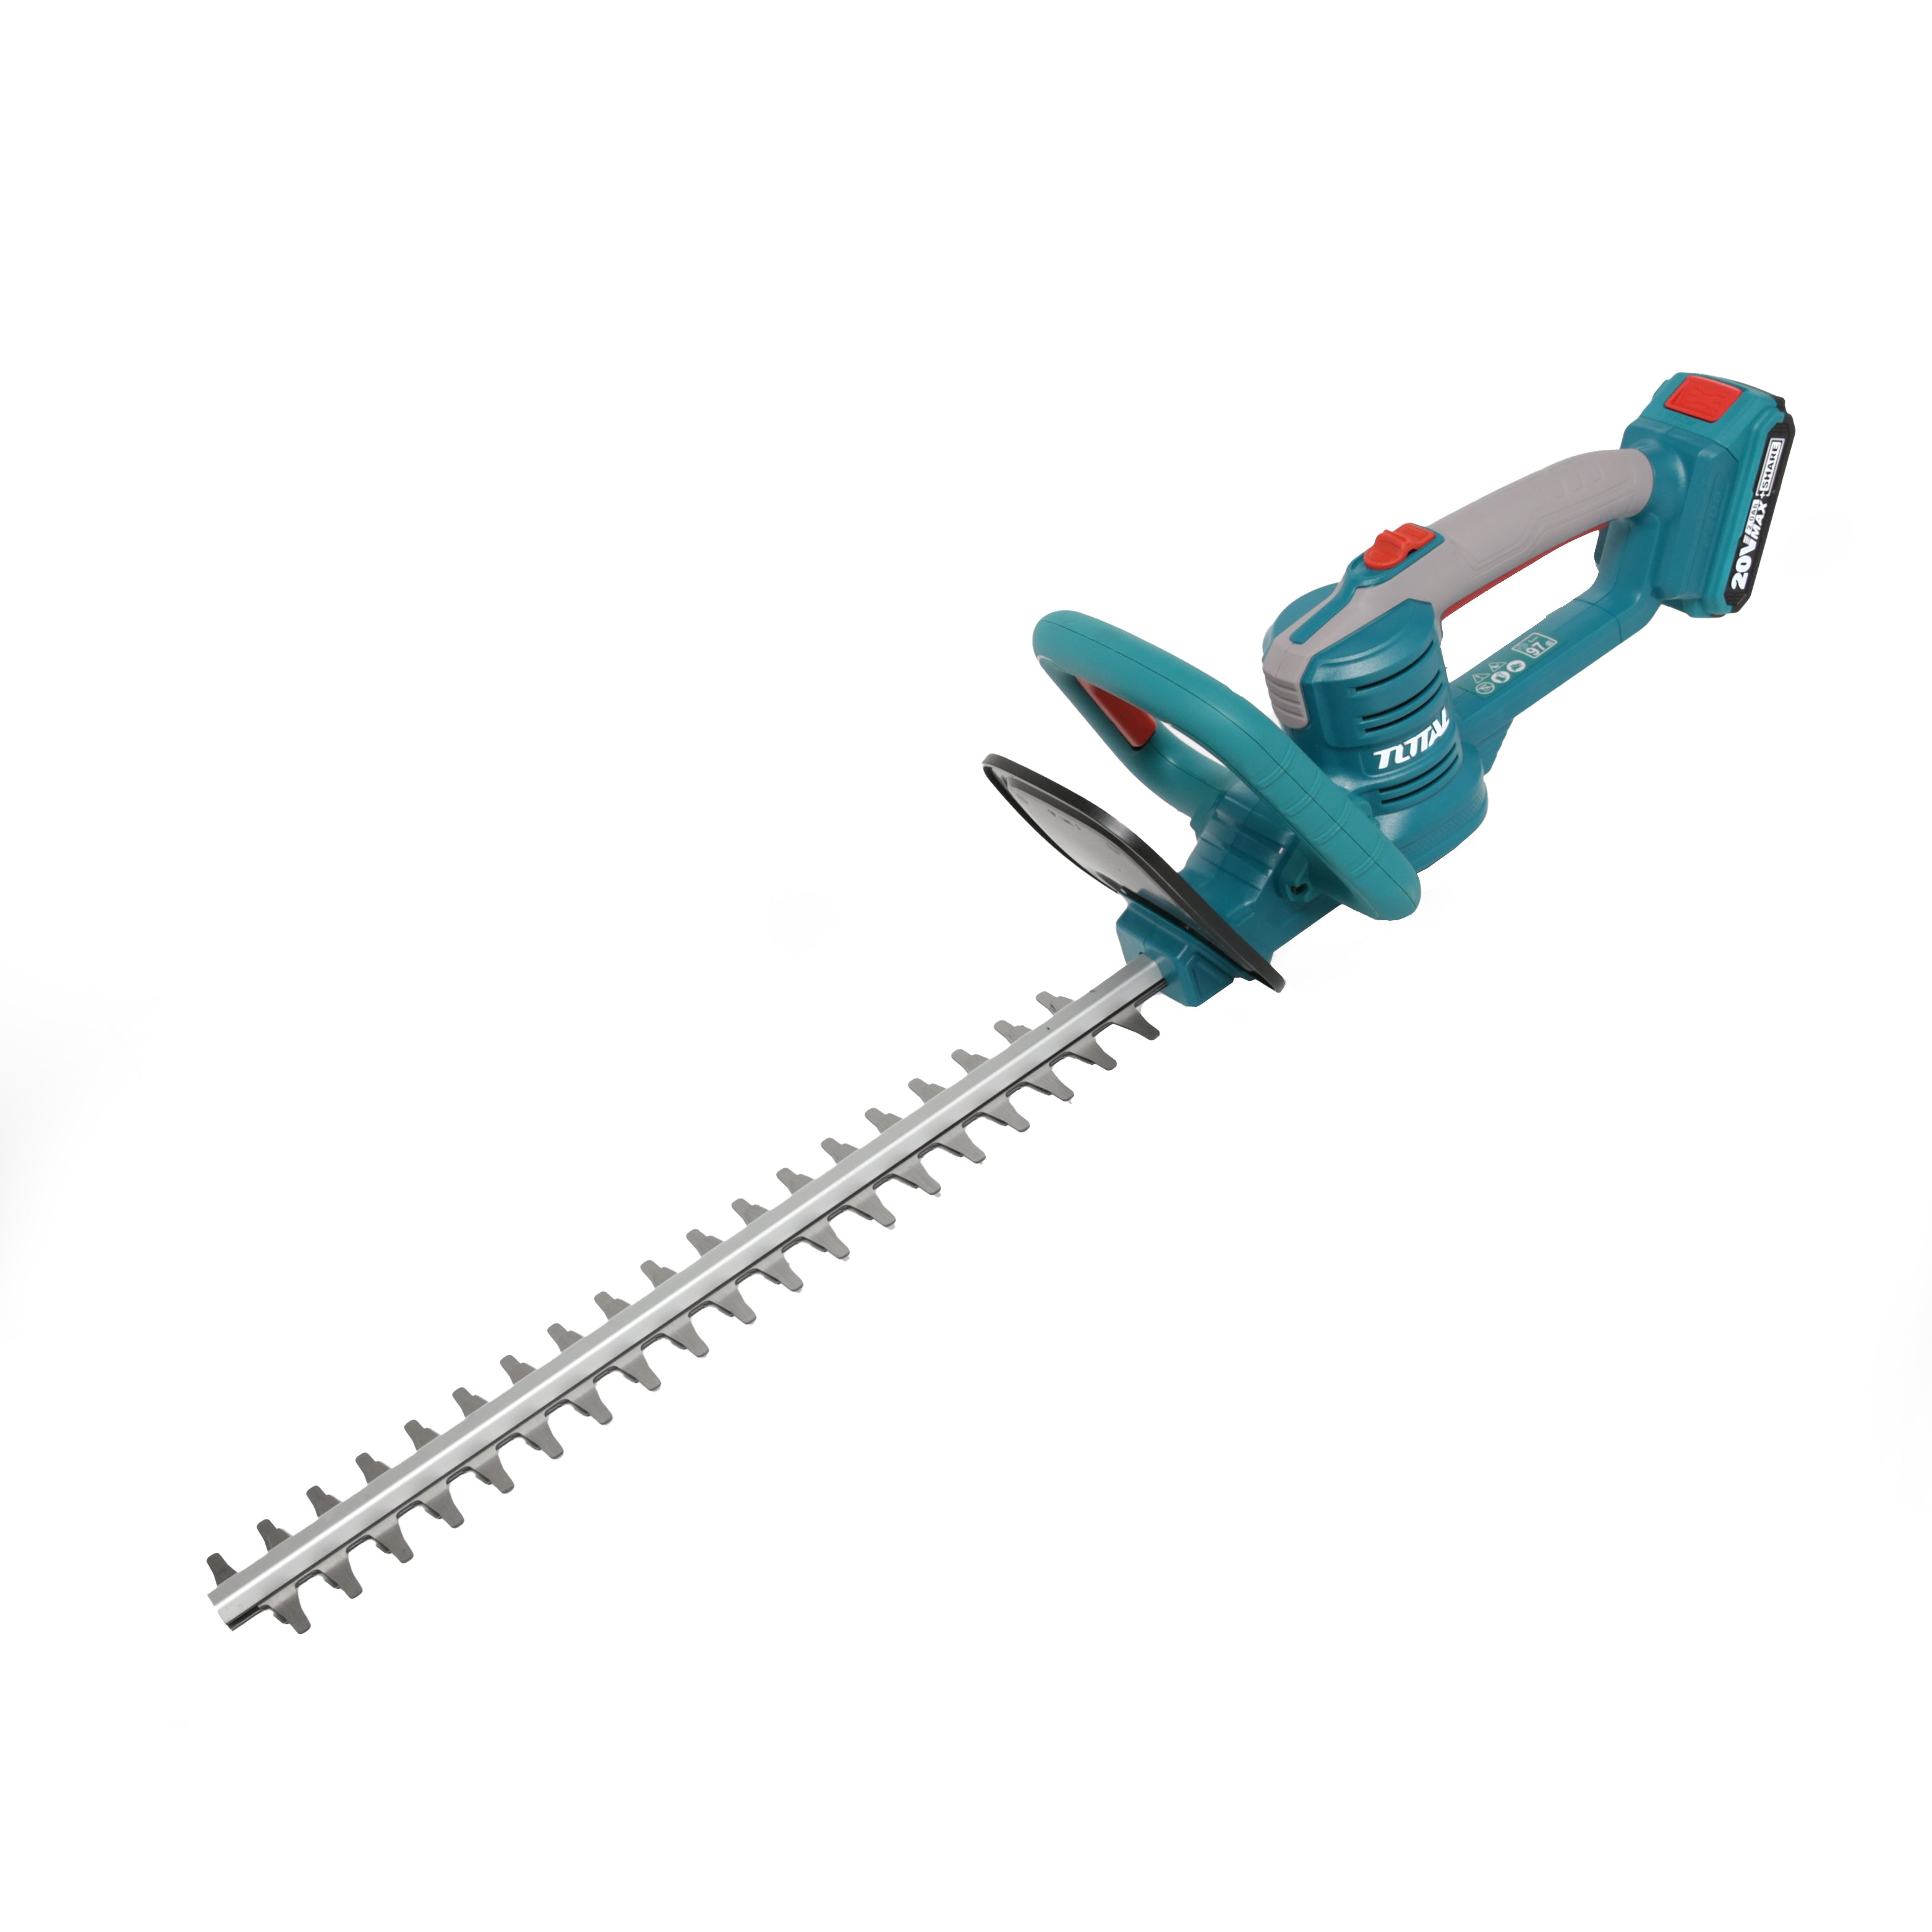 Total Li-Ion 20V Hedge Trimmer (with Battery & Charger) - THTLI20461